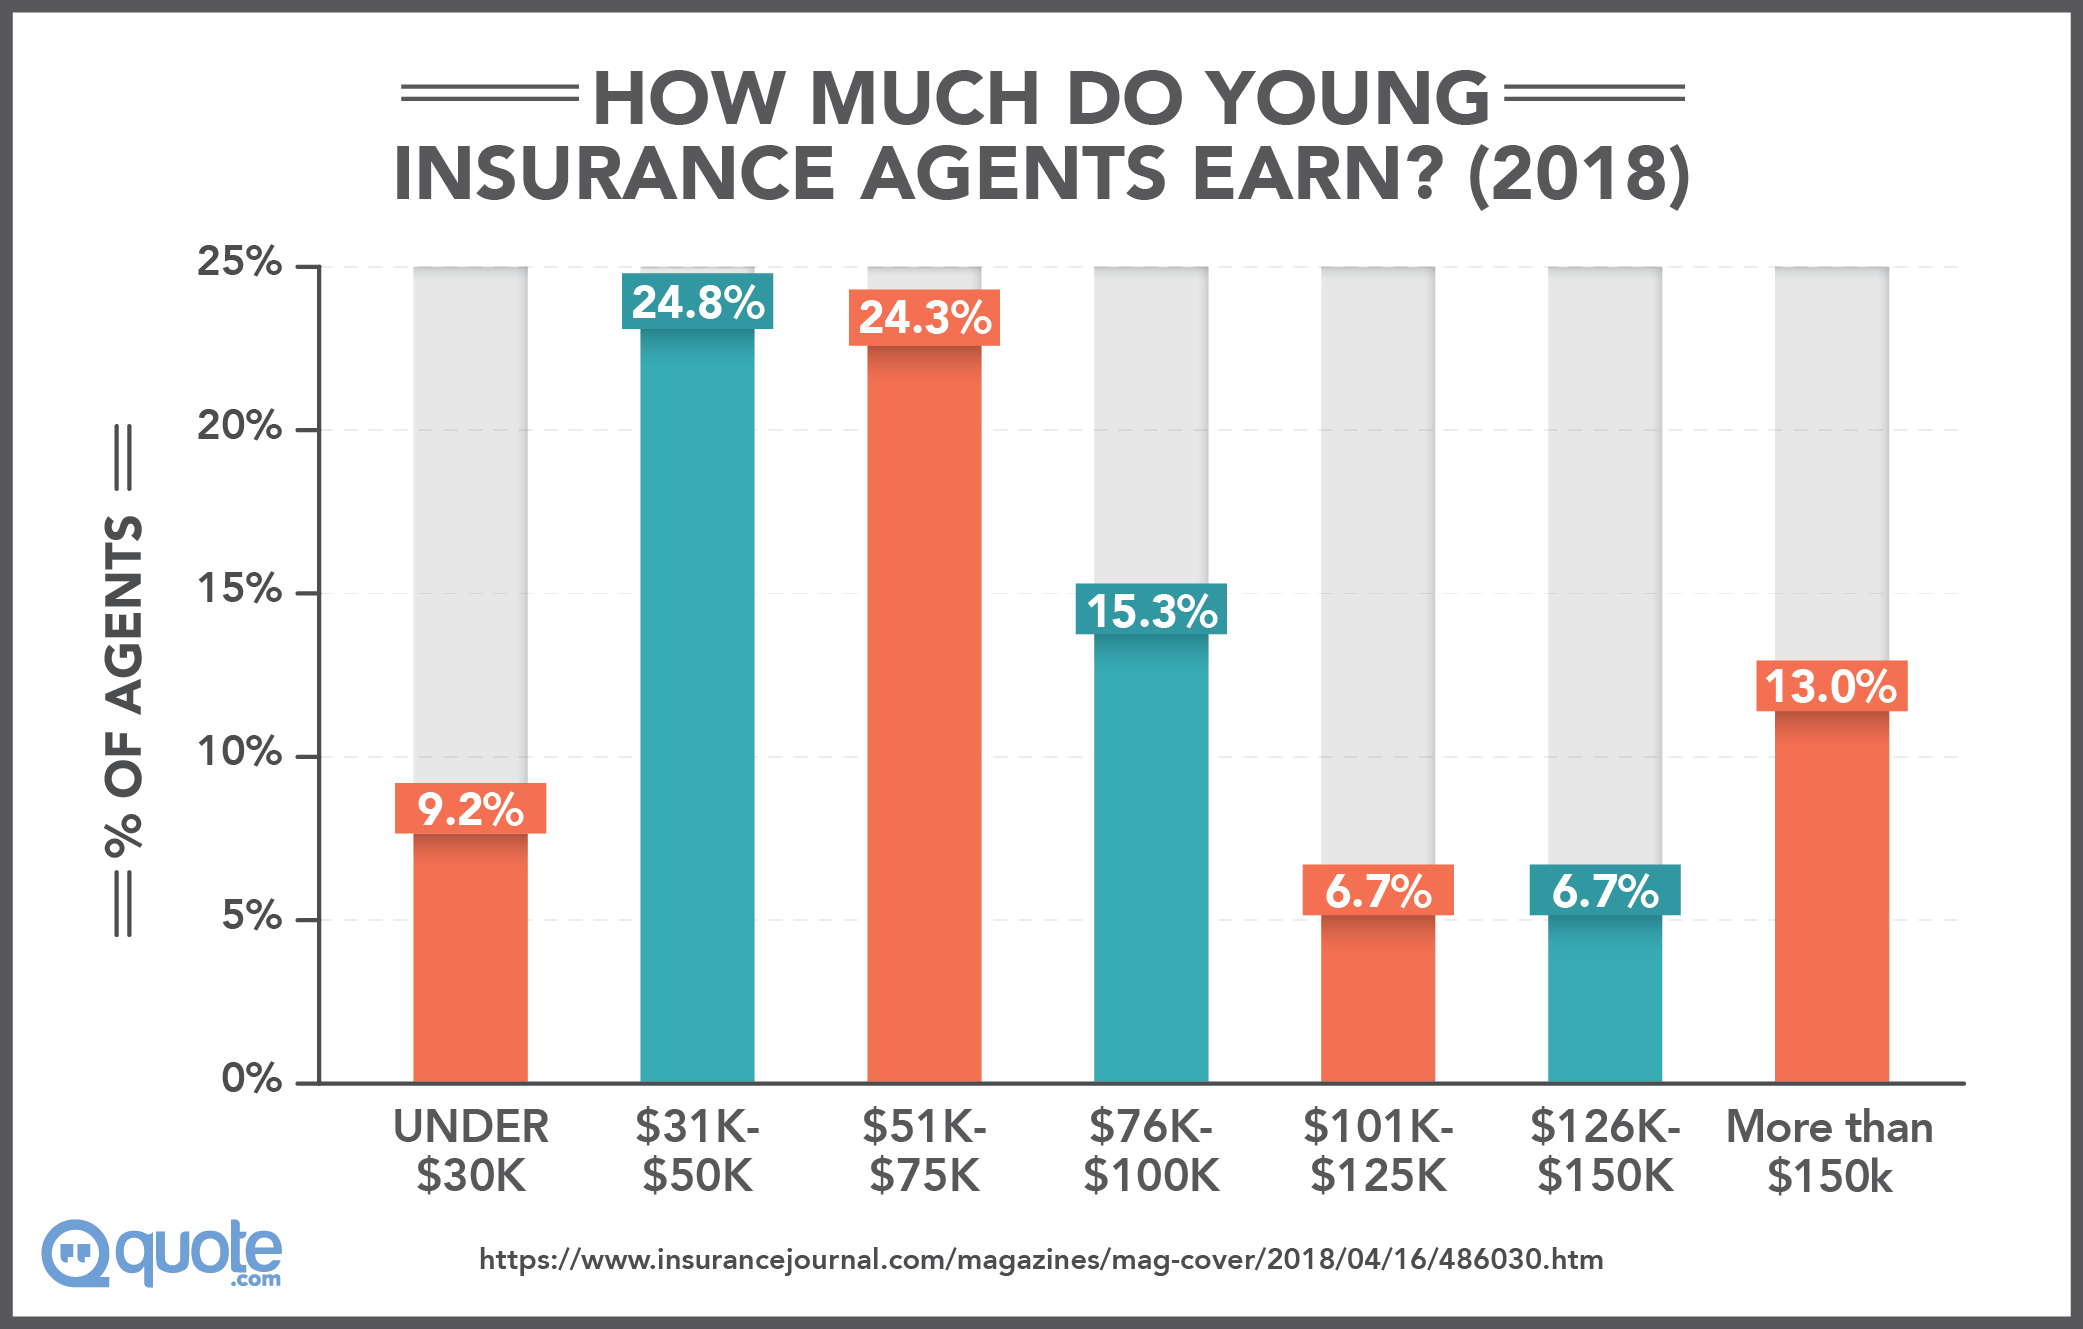 Survey: How Much Do Young Insurance Agents Earn?